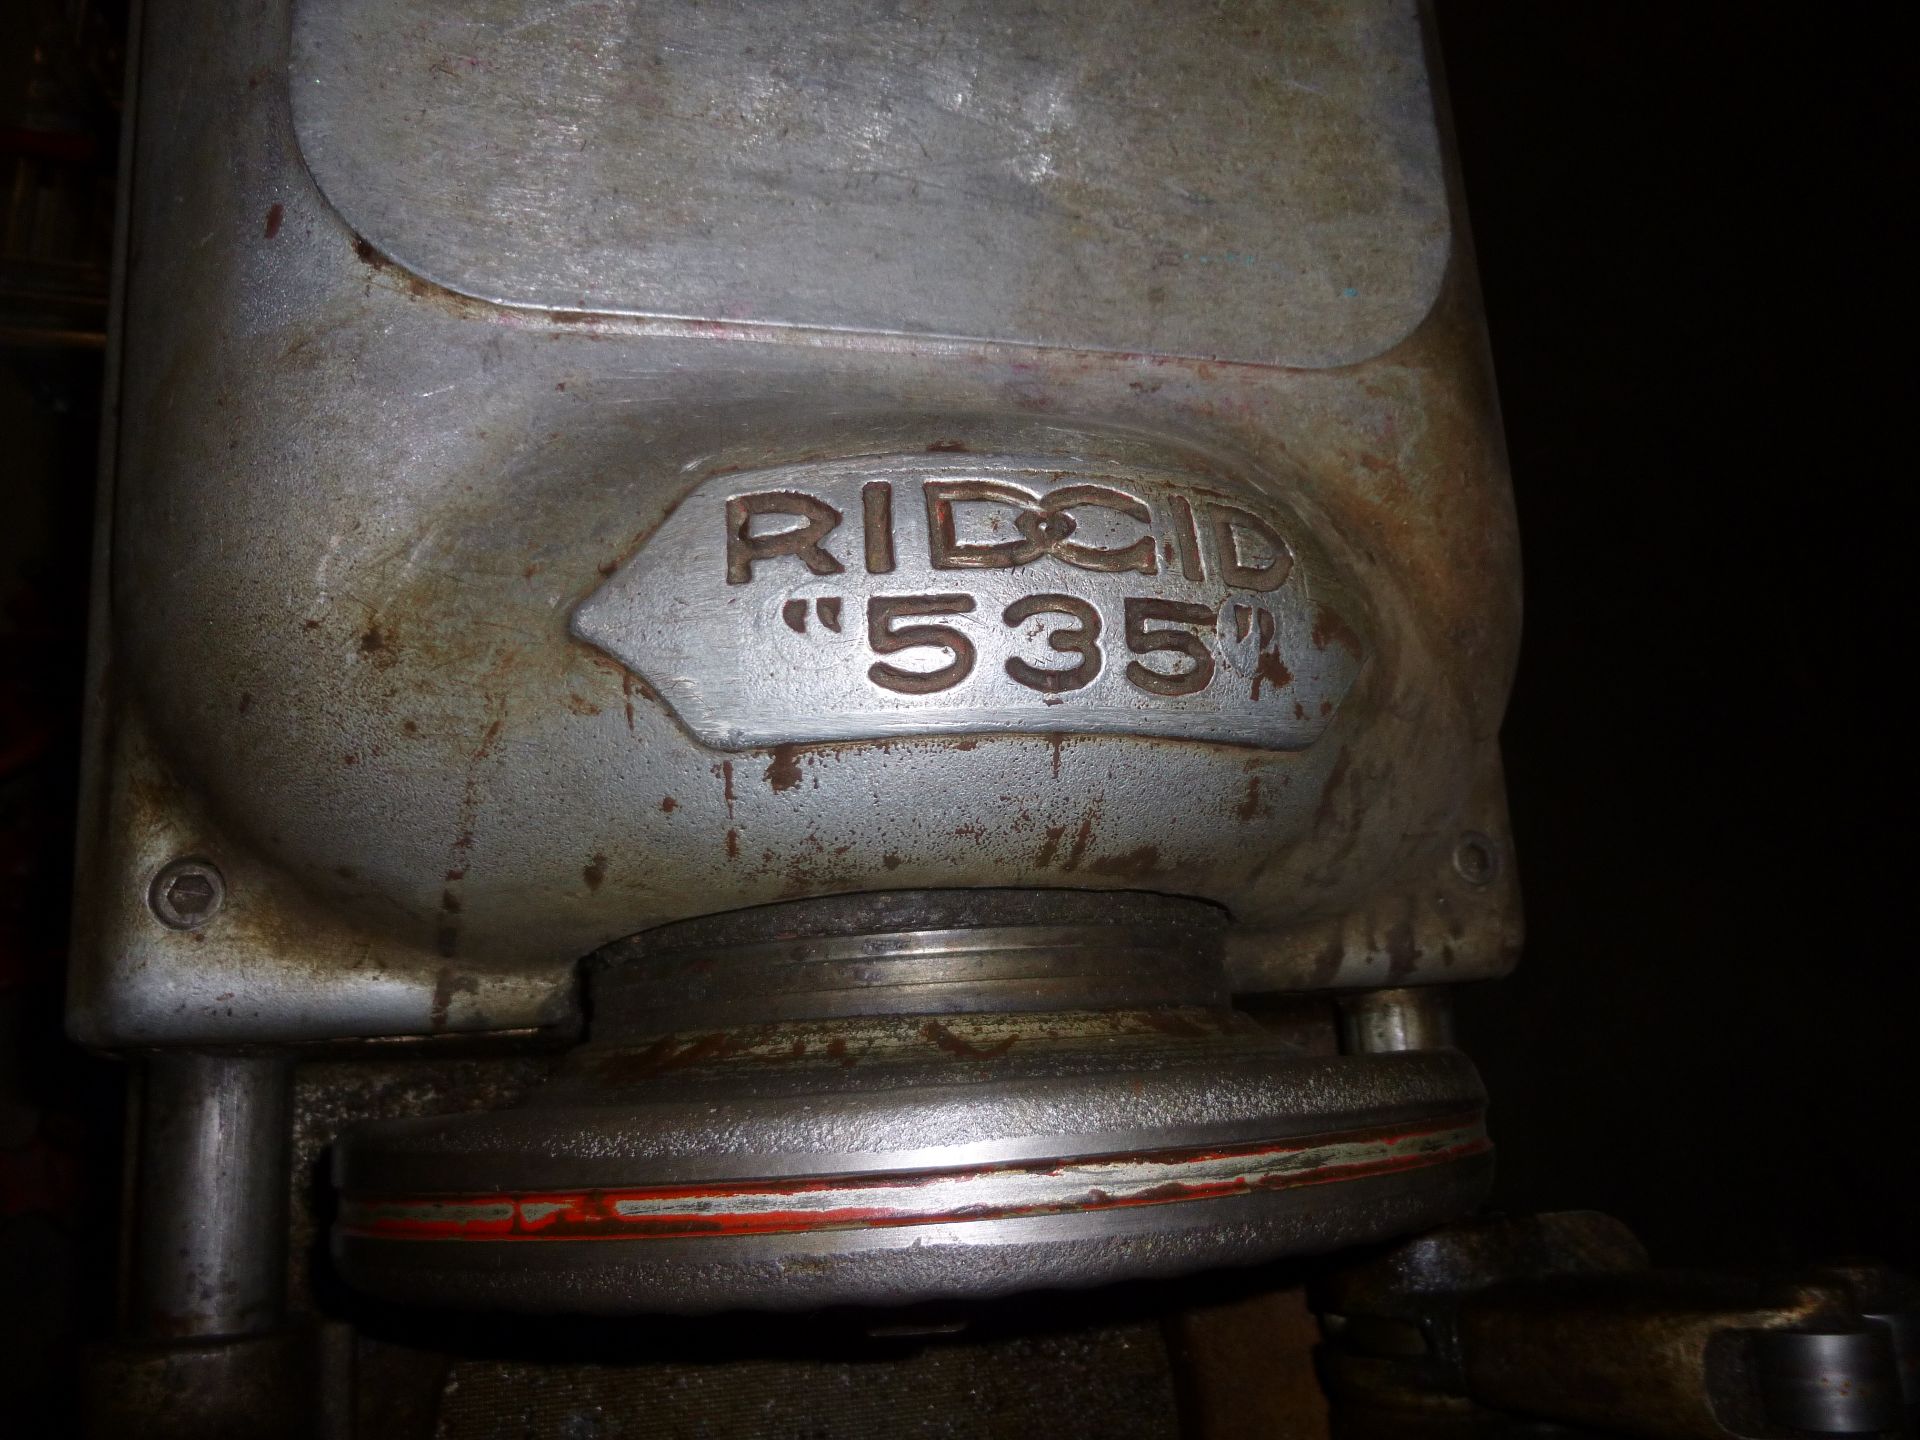 Ridgid 535 electric pipe threader, complete includes 6 die heads as pictured. Shipping can be - Image 5 of 8